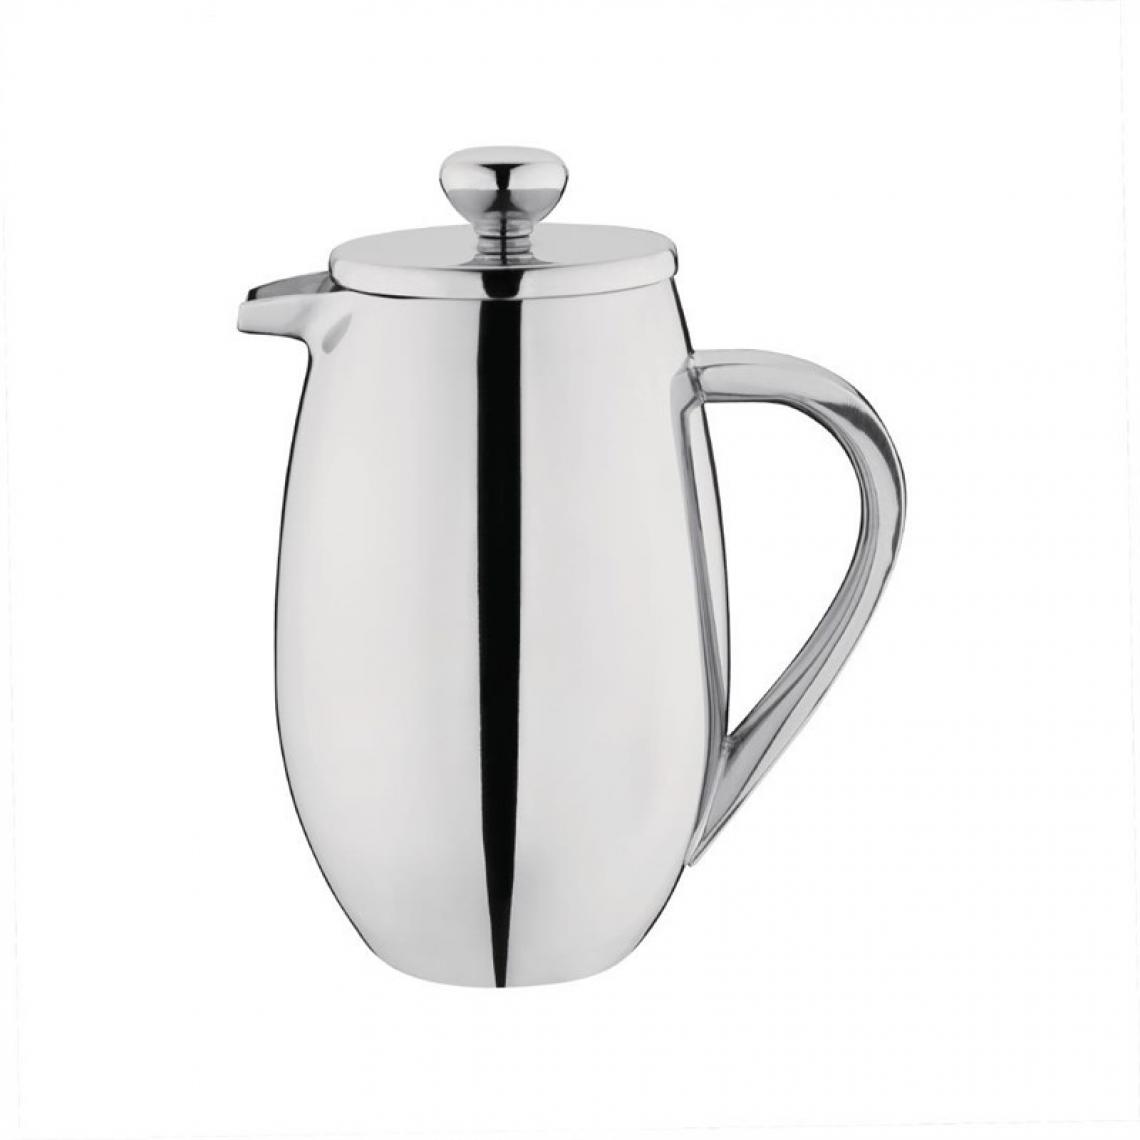 Olympia - Cafetière isotherme en inox poli - 3 tasses - Olympia - Inox 35 cl - Expresso - Cafetière